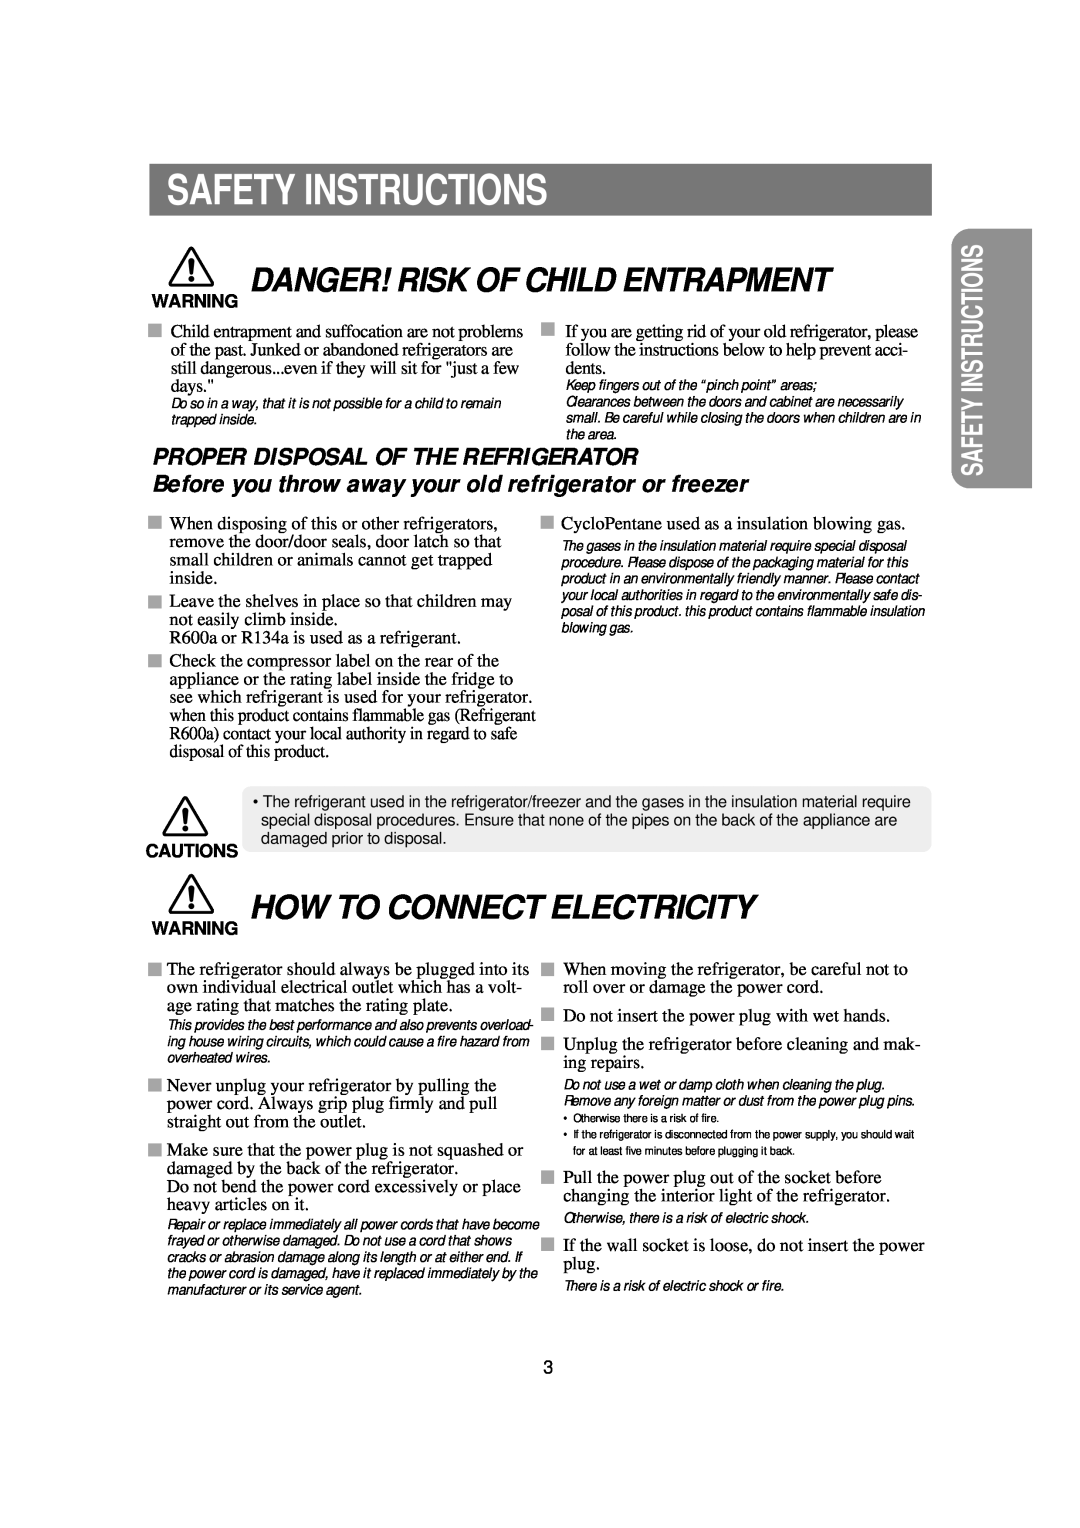 Samsung RSE8J, RSE8K, RSE8T Safety Instructions, Cautions, Danger! Risk Of Child Entrapment, How To Connect Electricity 